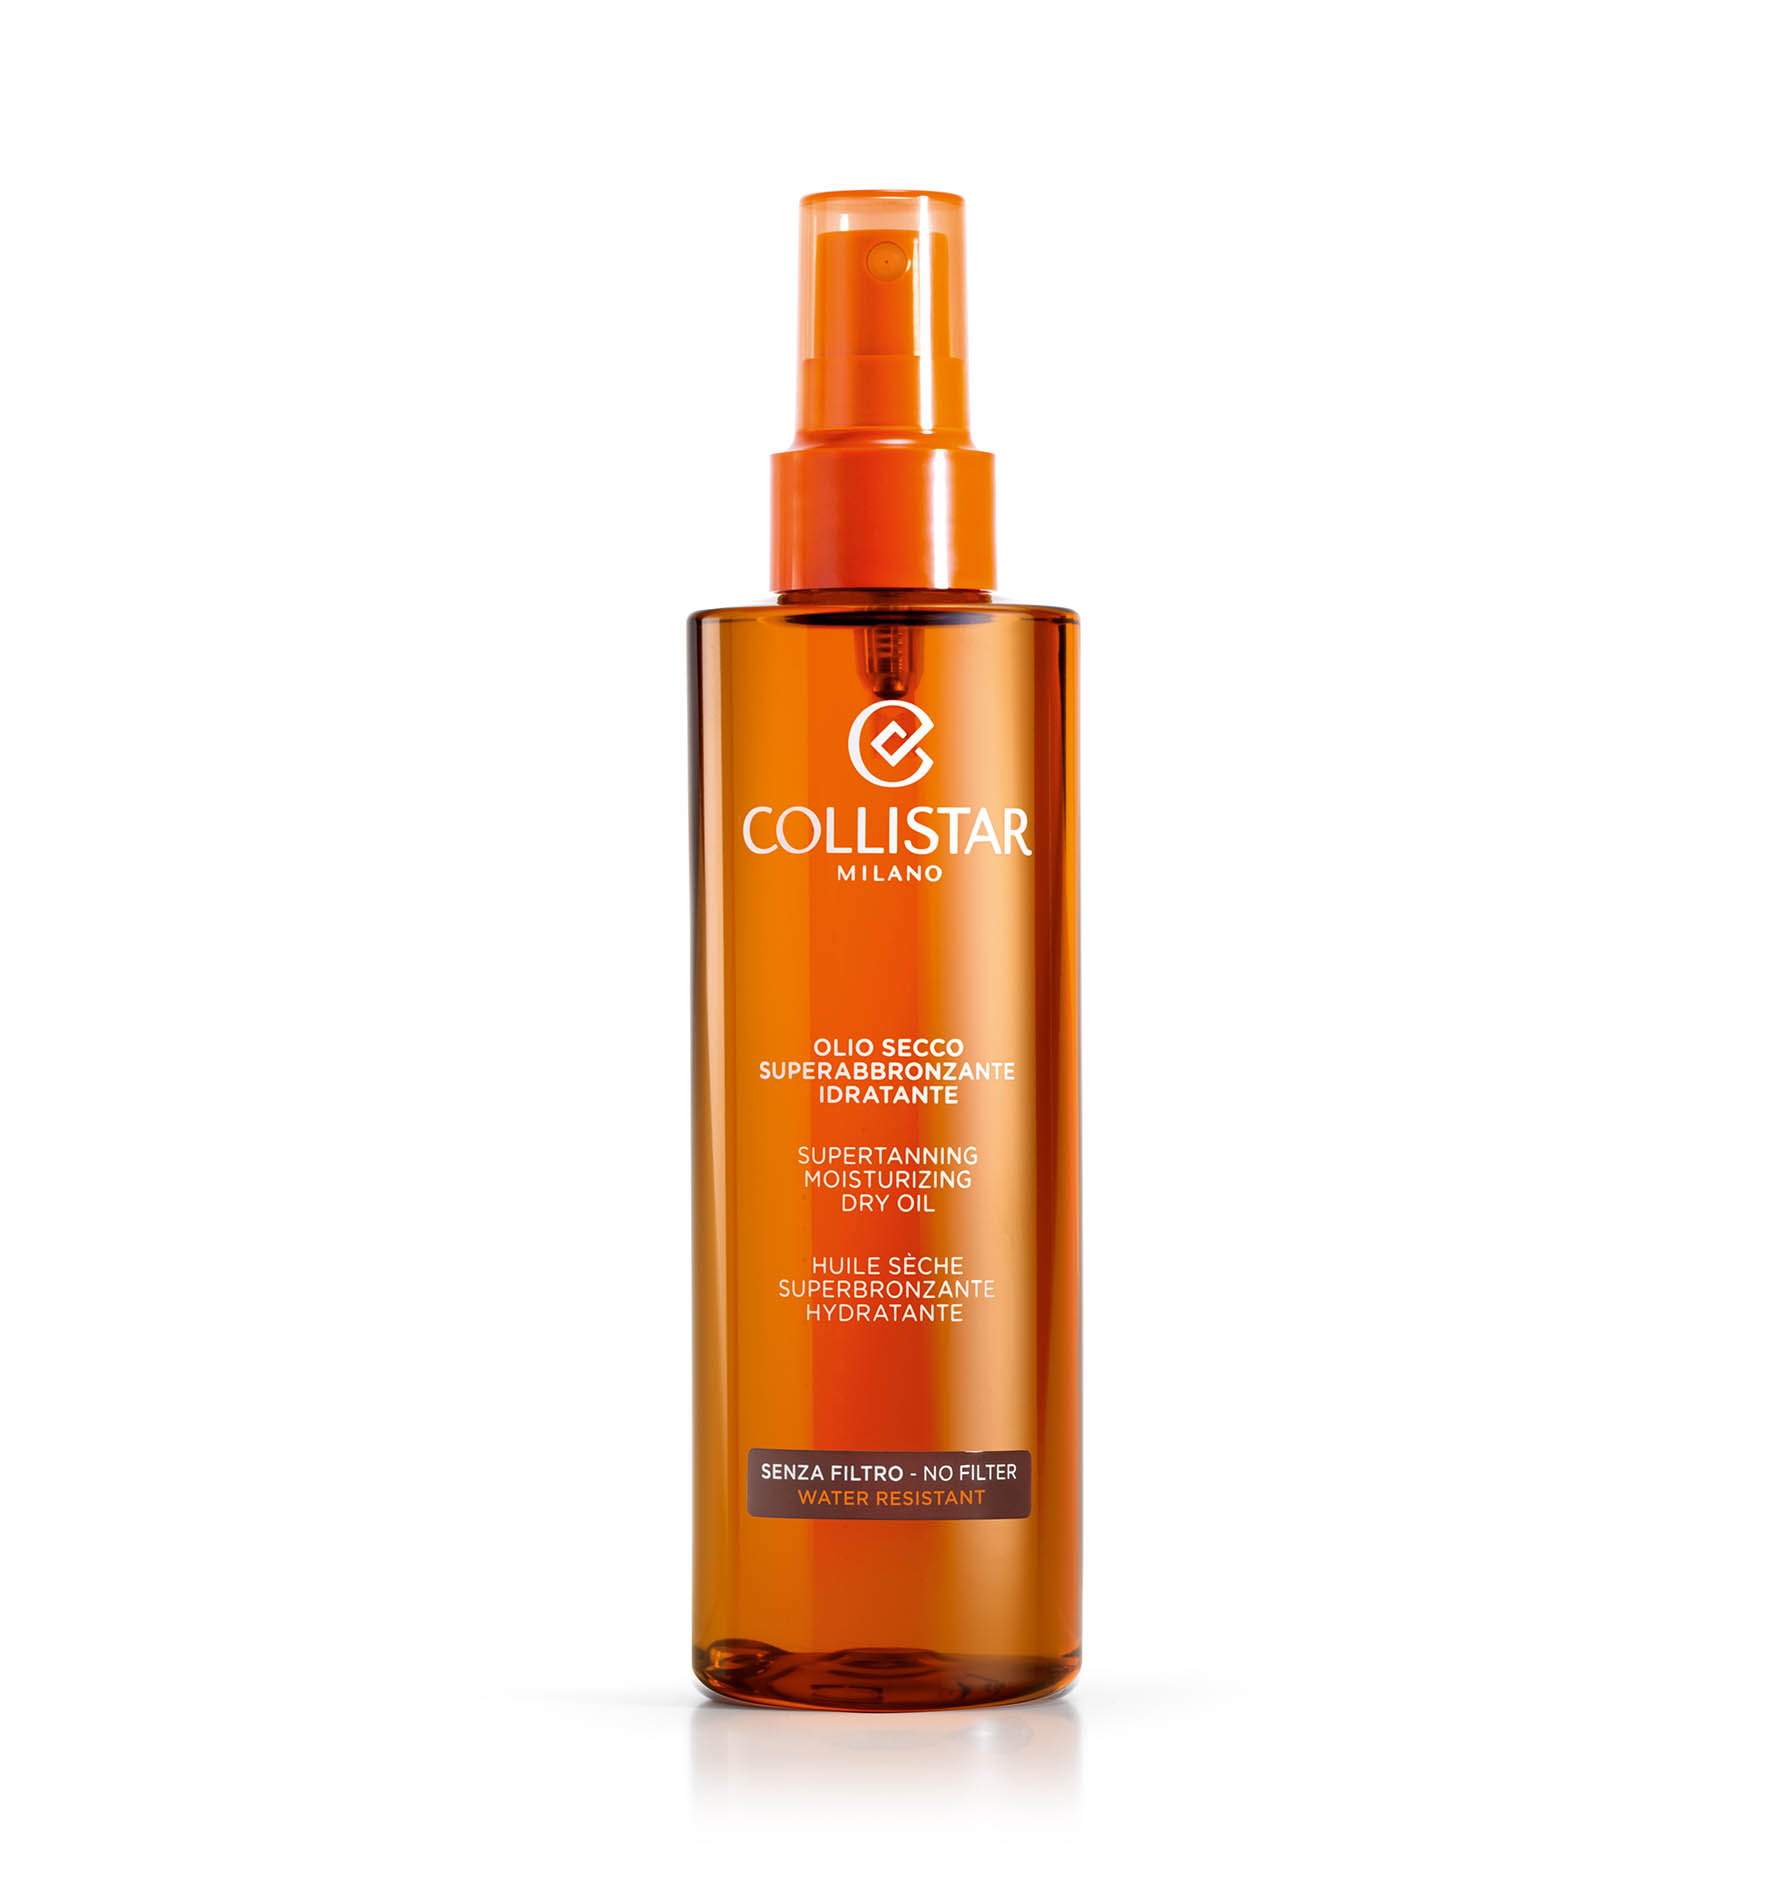 SUPERTANNING DRY OIL - Boosting  | Collistar - Shop Online Ufficiale